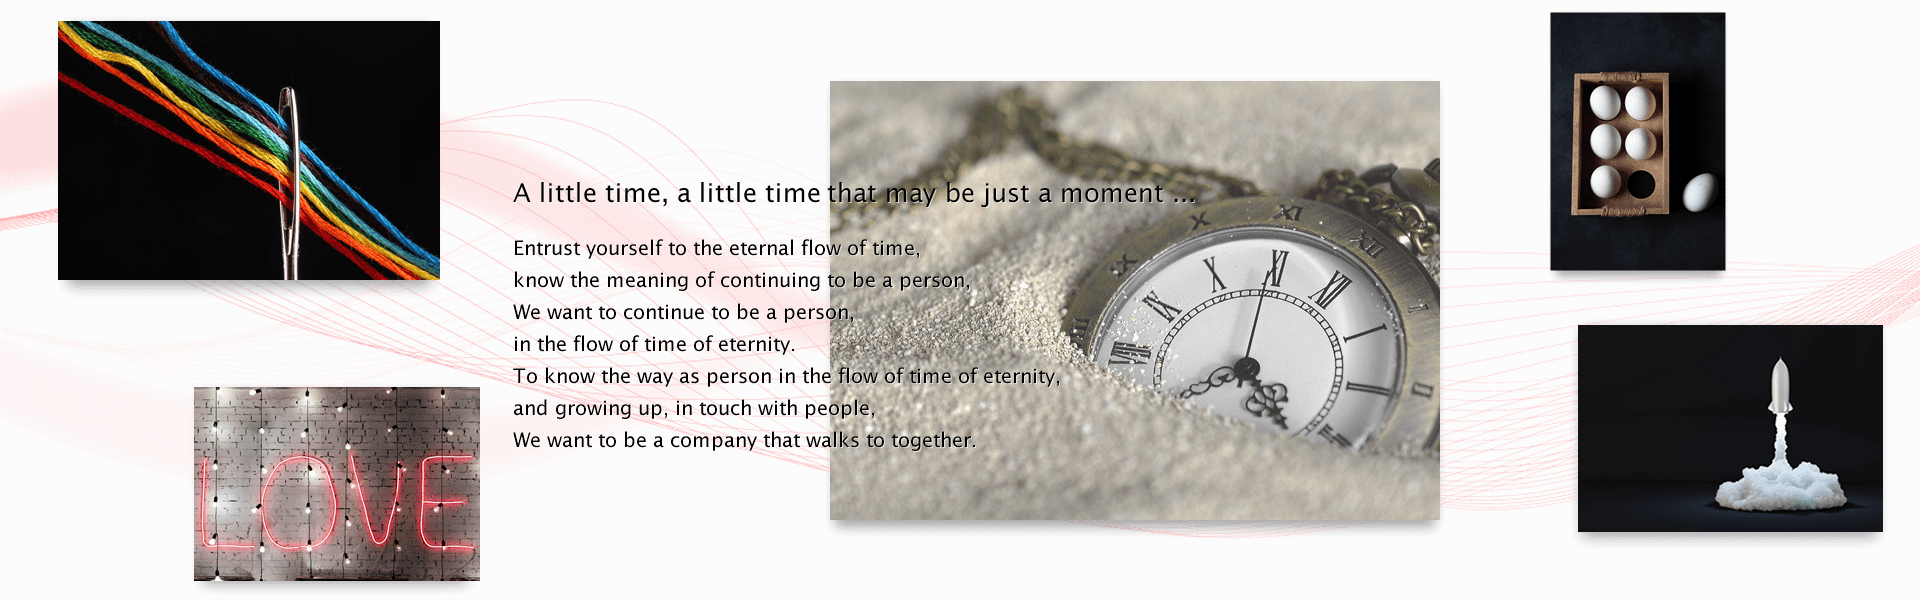 A little time, a little time that may be just a moment ...